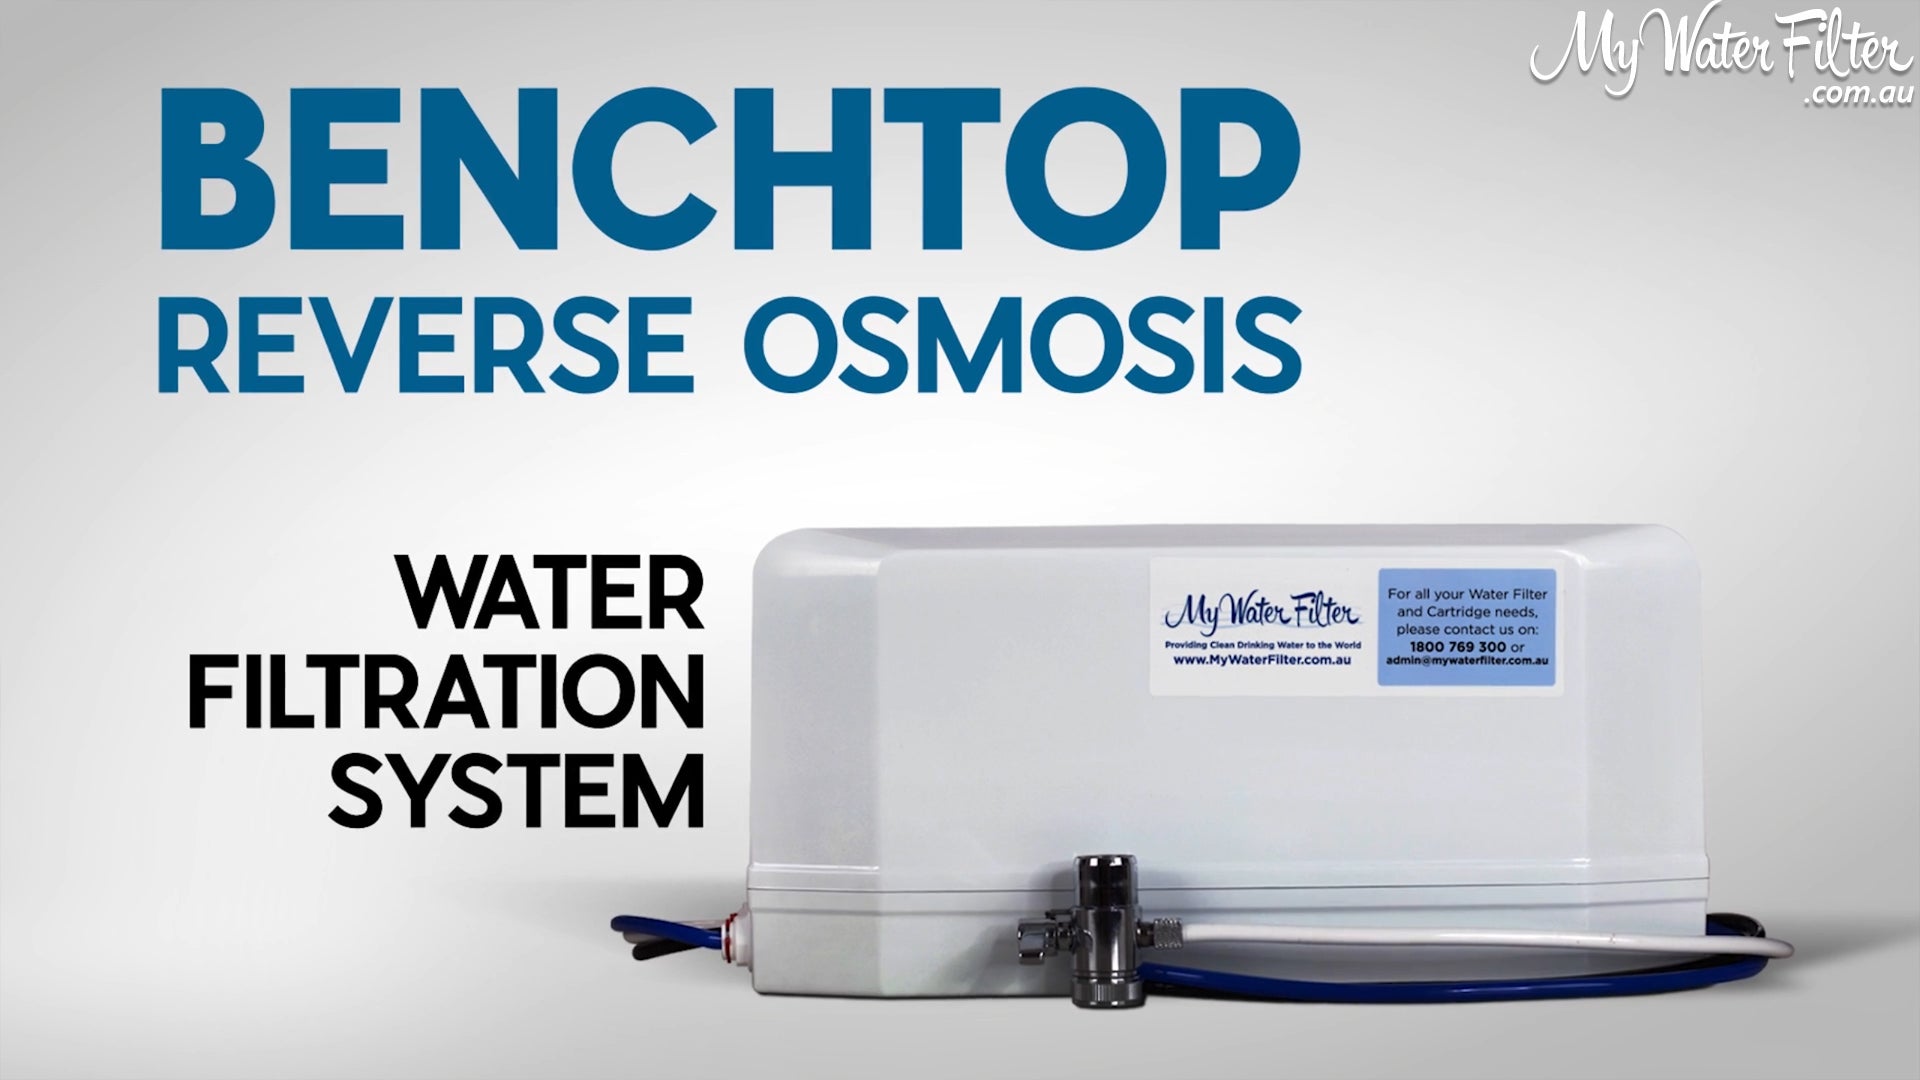 Benchtop Reverse Osmosis Water Filtration System